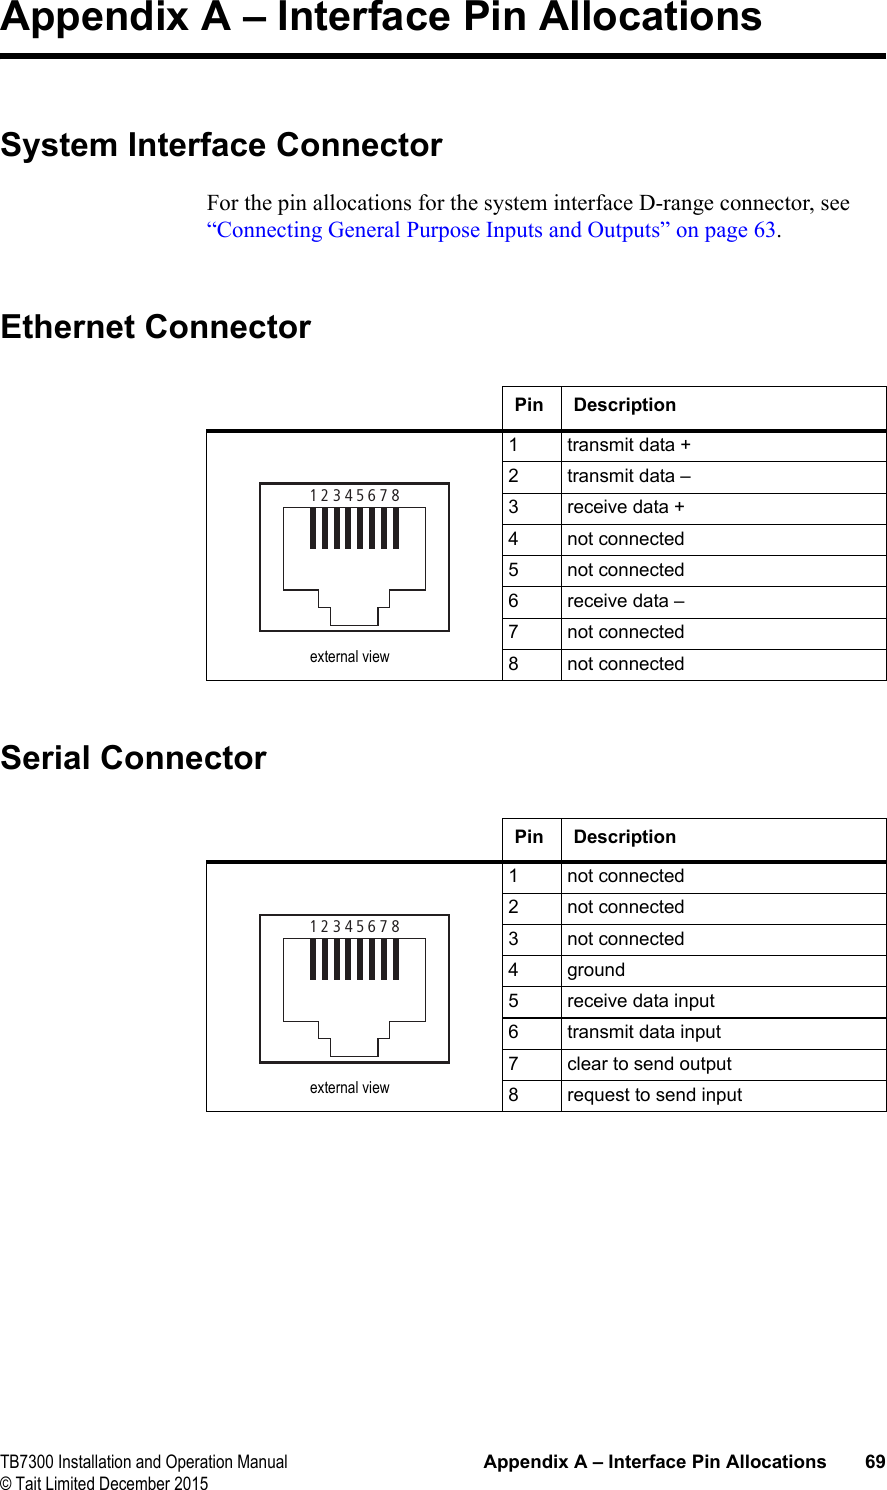  TB7300 Installation and Operation Manual Appendix A – Interface Pin Allocations 69© Tait Limited December 2015Appendix A – Interface Pin AllocationsSystem Interface ConnectorFor the pin allocations for the system interface D-range connector, see “Connecting General Purpose Inputs and Outputs” on page 63.Ethernet ConnectorSerial ConnectorPin Description1 transmit data +2 transmit data –3 receive data +4 not connected5 not connected6 receive data –7 not connected8 not connected12345678external viewPin Description1 not connected2 not connected3 not connected4 ground5 receive data input6 transmit data input7 clear to send output8 request to send input12345678external view